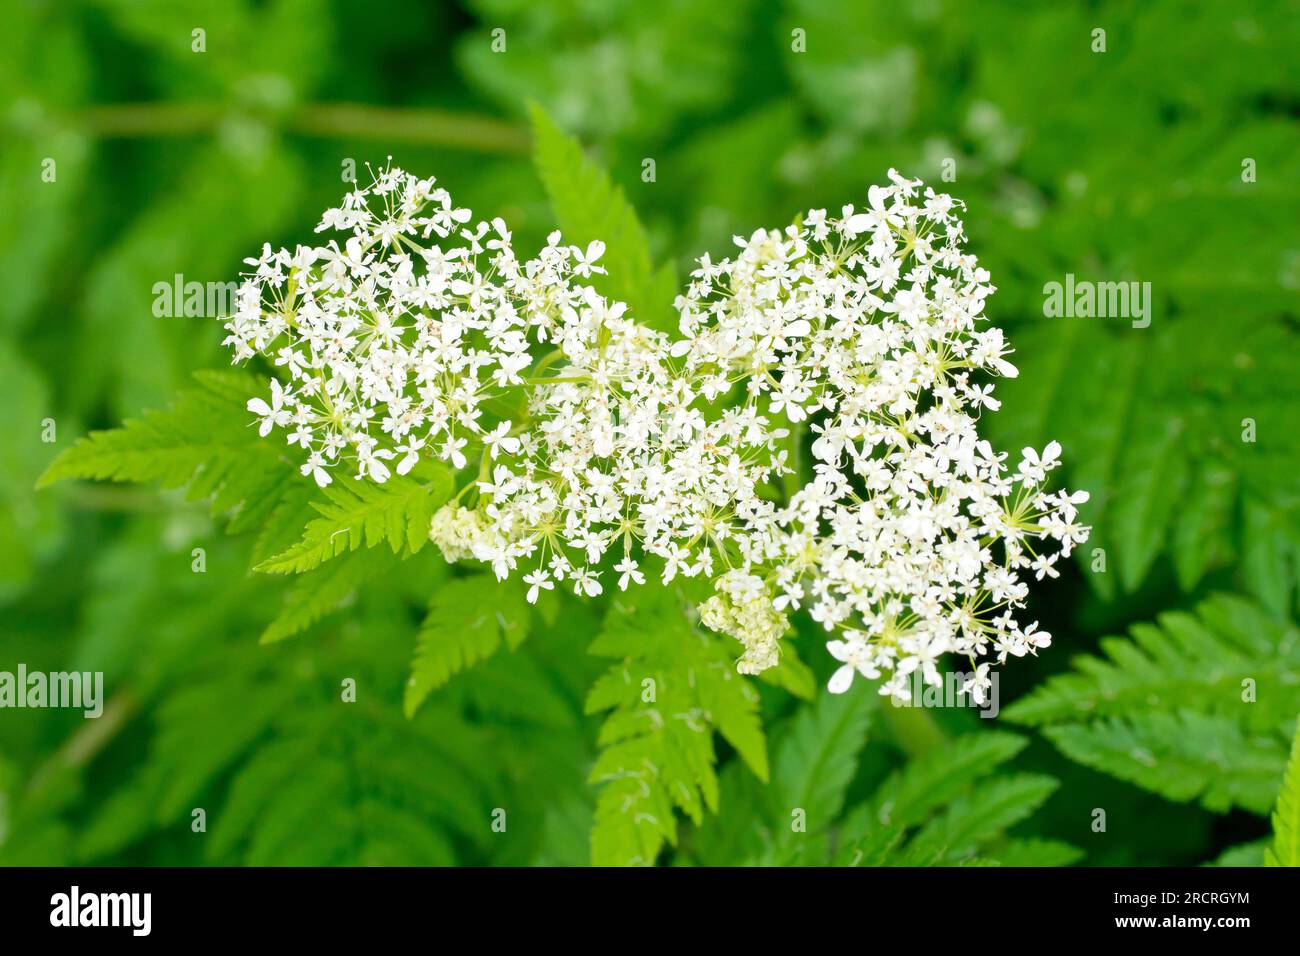 Sweet Cicely (myrrhis odorata), close up showing the small white flowers of the pungent smelling plant, common in woodland and grassy places. Stock Photo